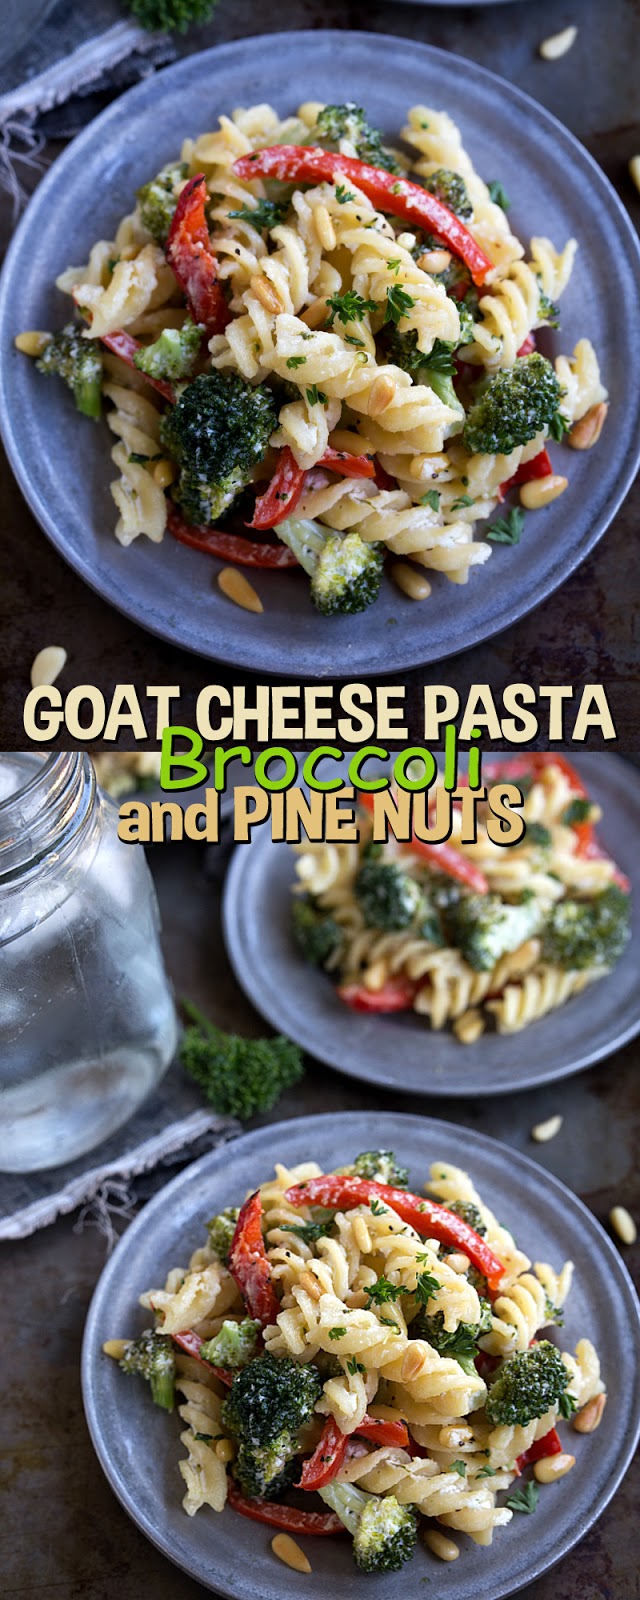 GOAT CHEESE PASTA, BROCCOLI, AND PINE NUTS